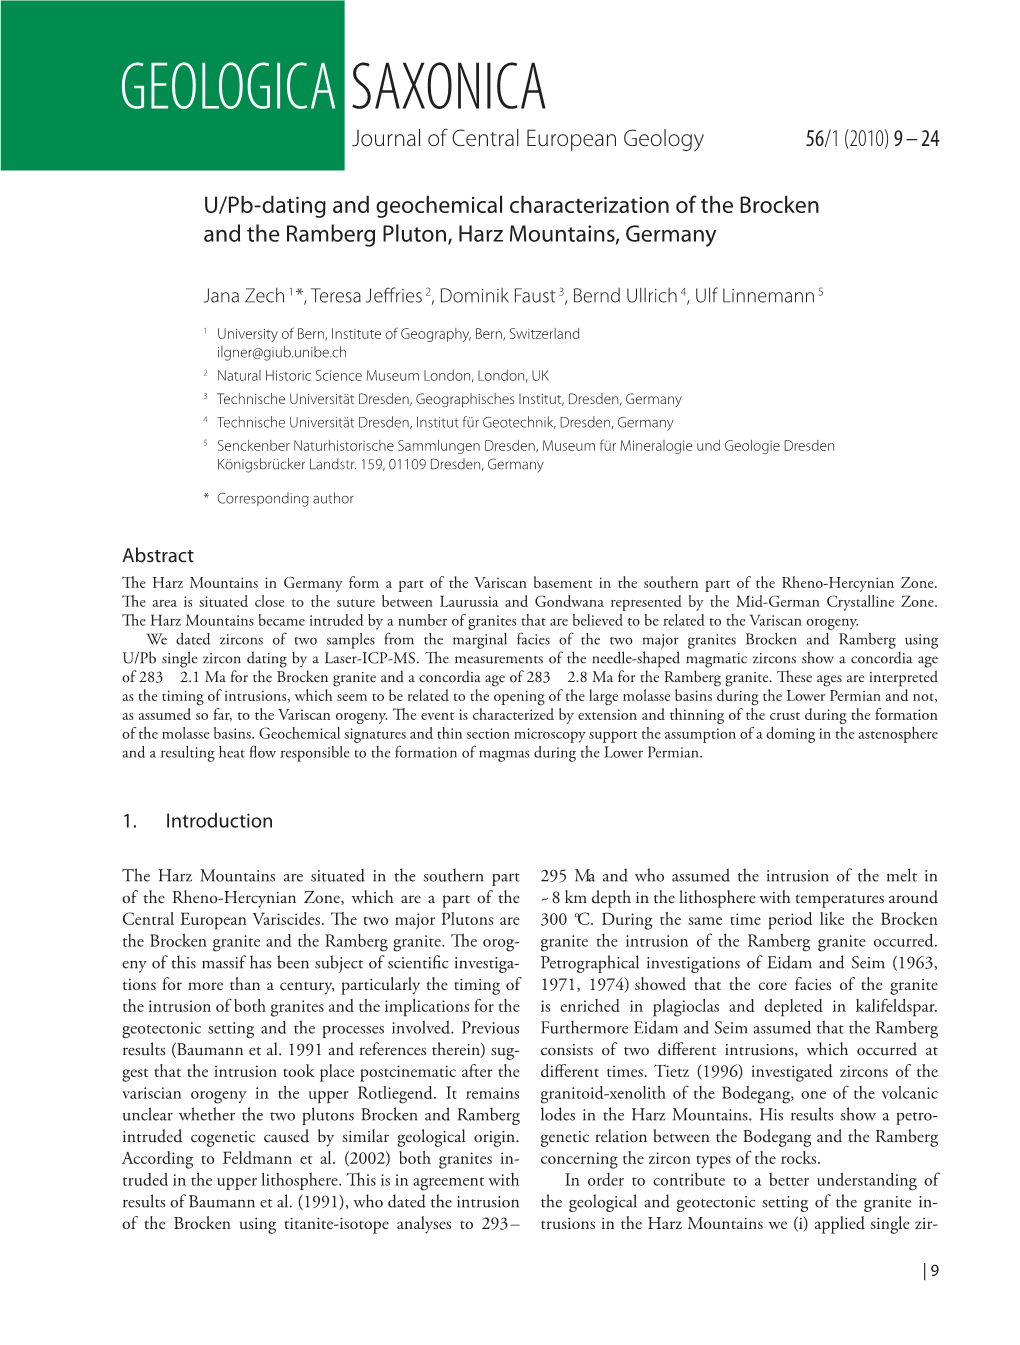 U/Pb-Dating and Geochemical Characterization of the Brocken and the Ramberg Pluton, Harz Mountains, Germany